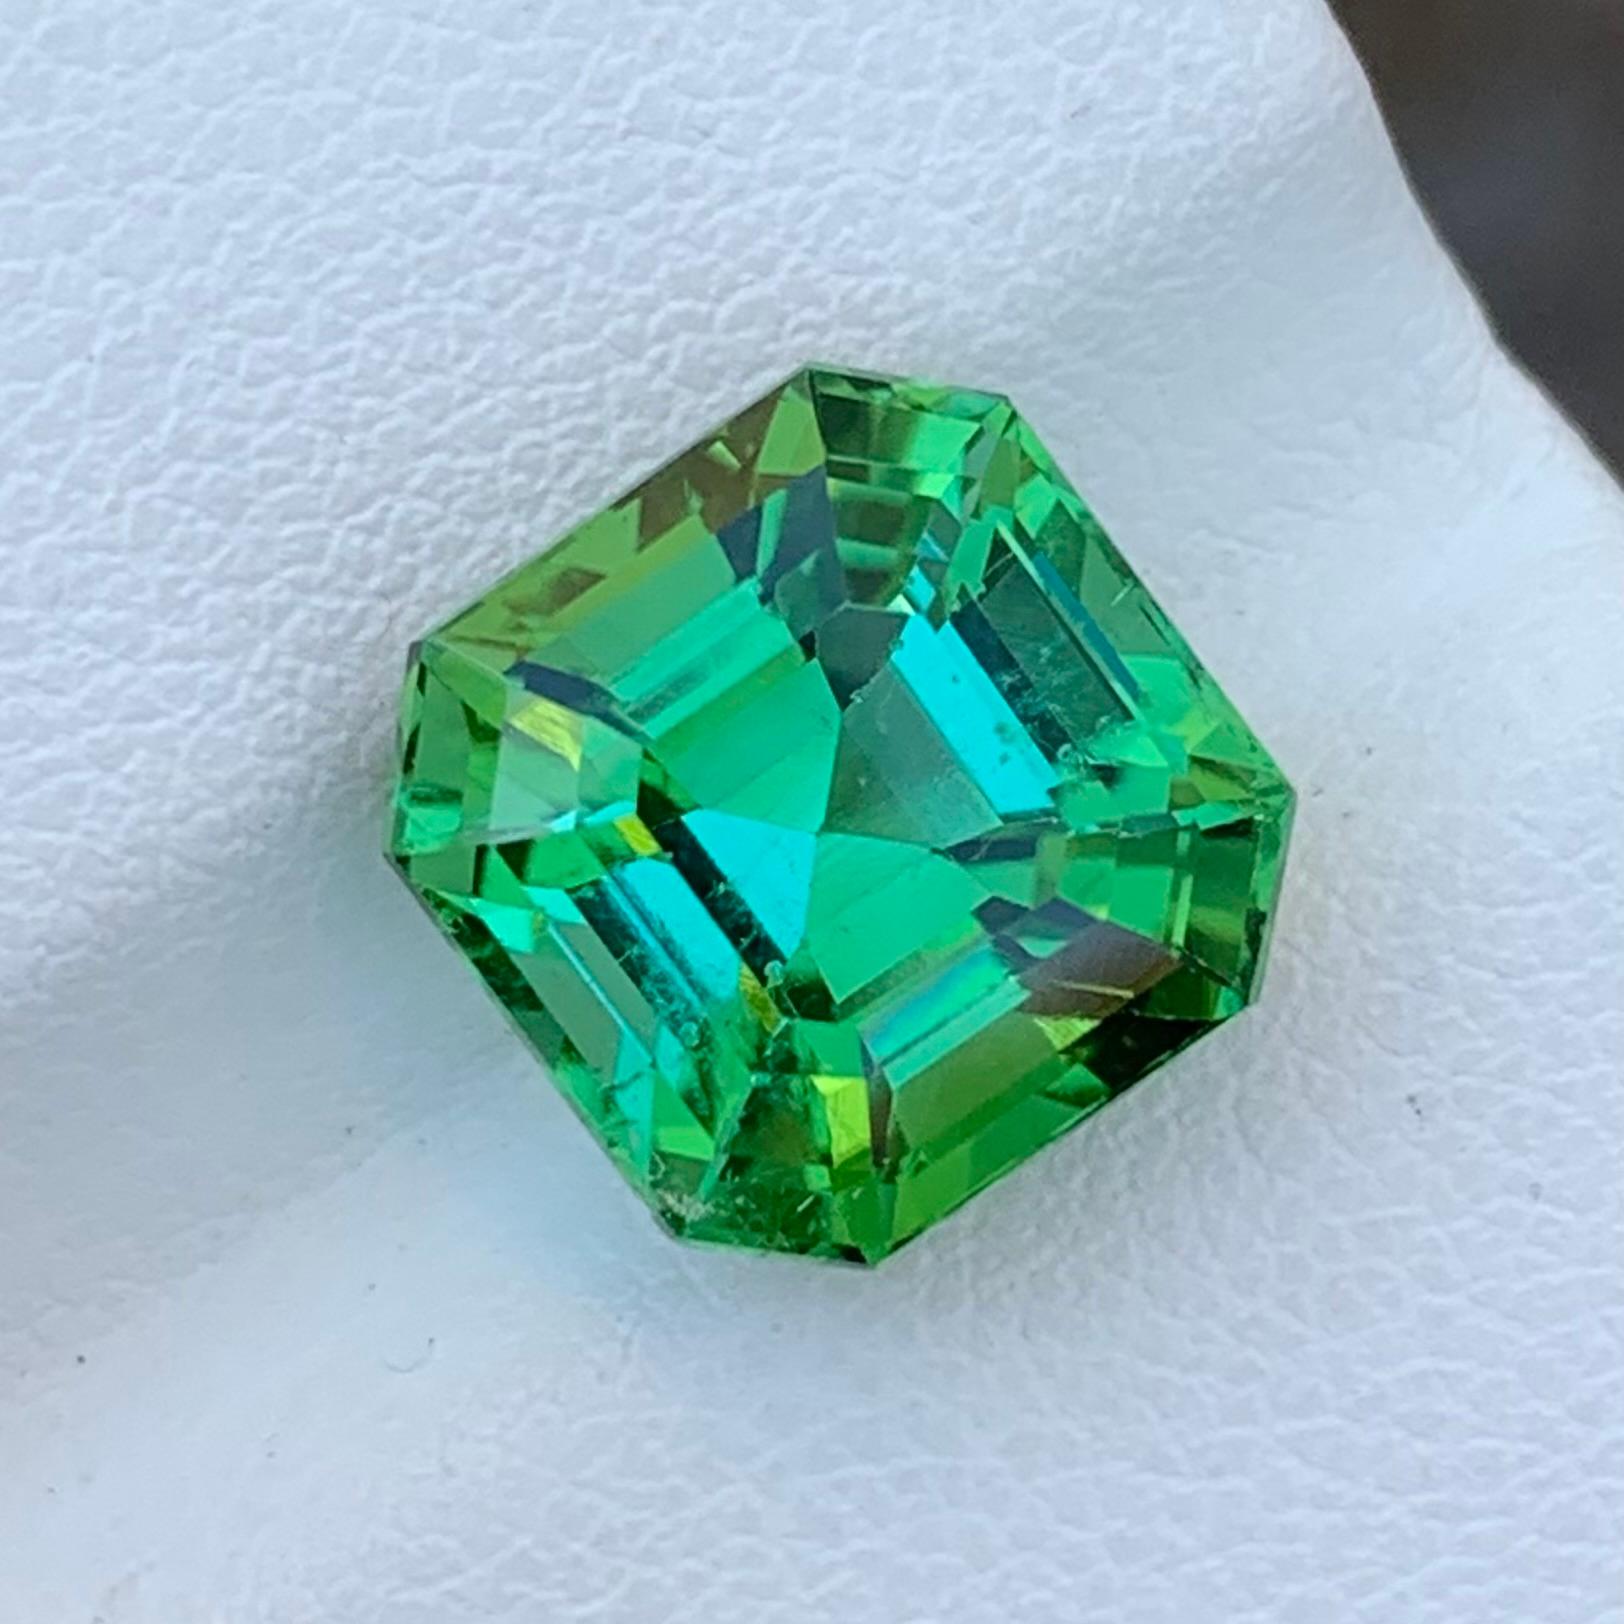 Loose Bright Green Tourmaline

Weight: 6.25 Carats
Dimension: 10.1 x 10 x 8.5 Mm
Colour: Green
Origin: Afghanistan
Certificate: On Demand
Treatment: Non

Tourmaline is a captivating gemstone known for its remarkable variety of colors, making it a